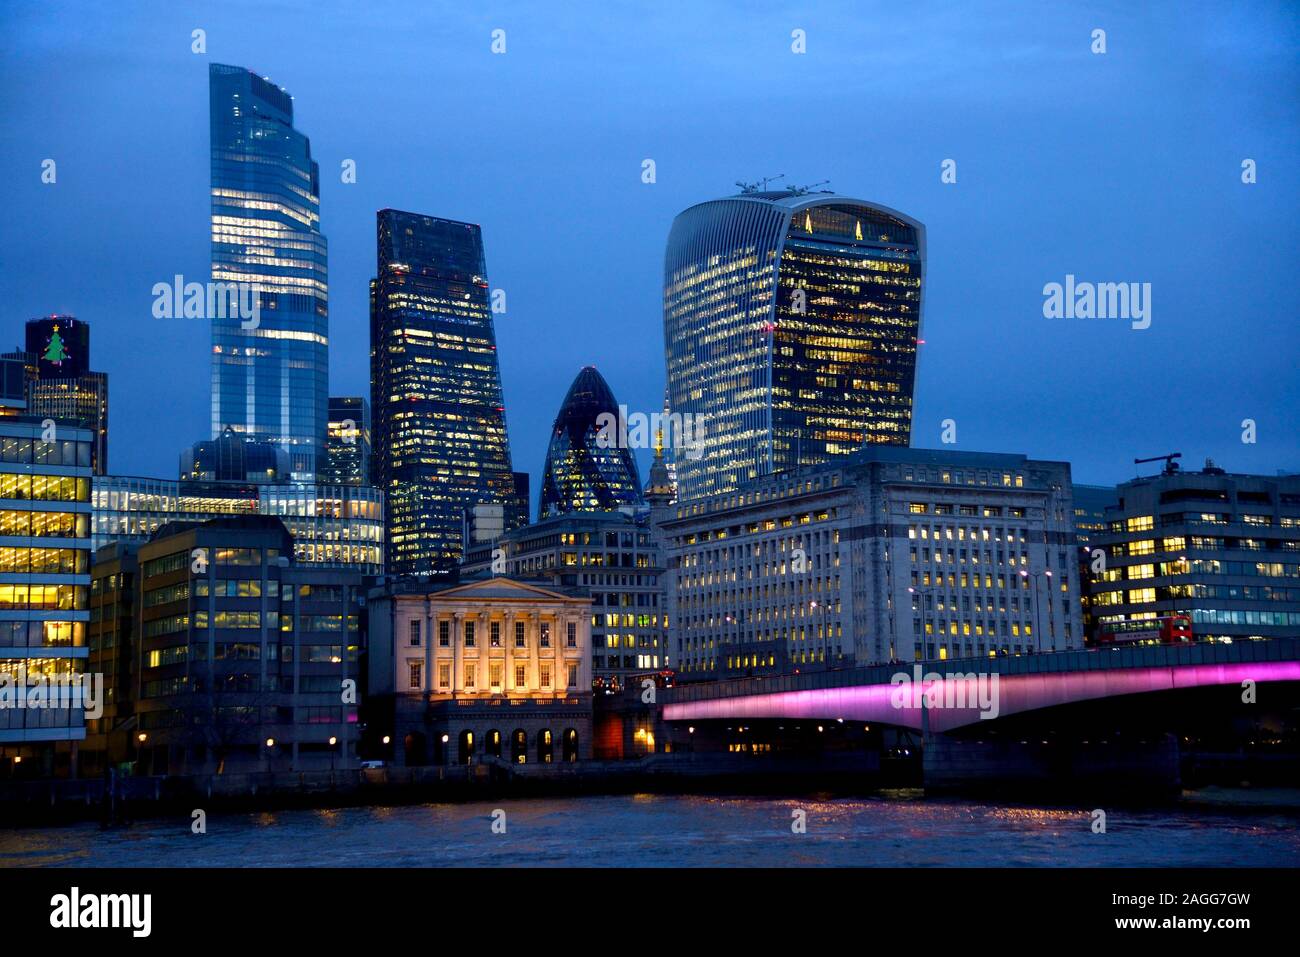 London, England, UK. The City of London and London Bridge at night, seen from the South Bank Stock Photo